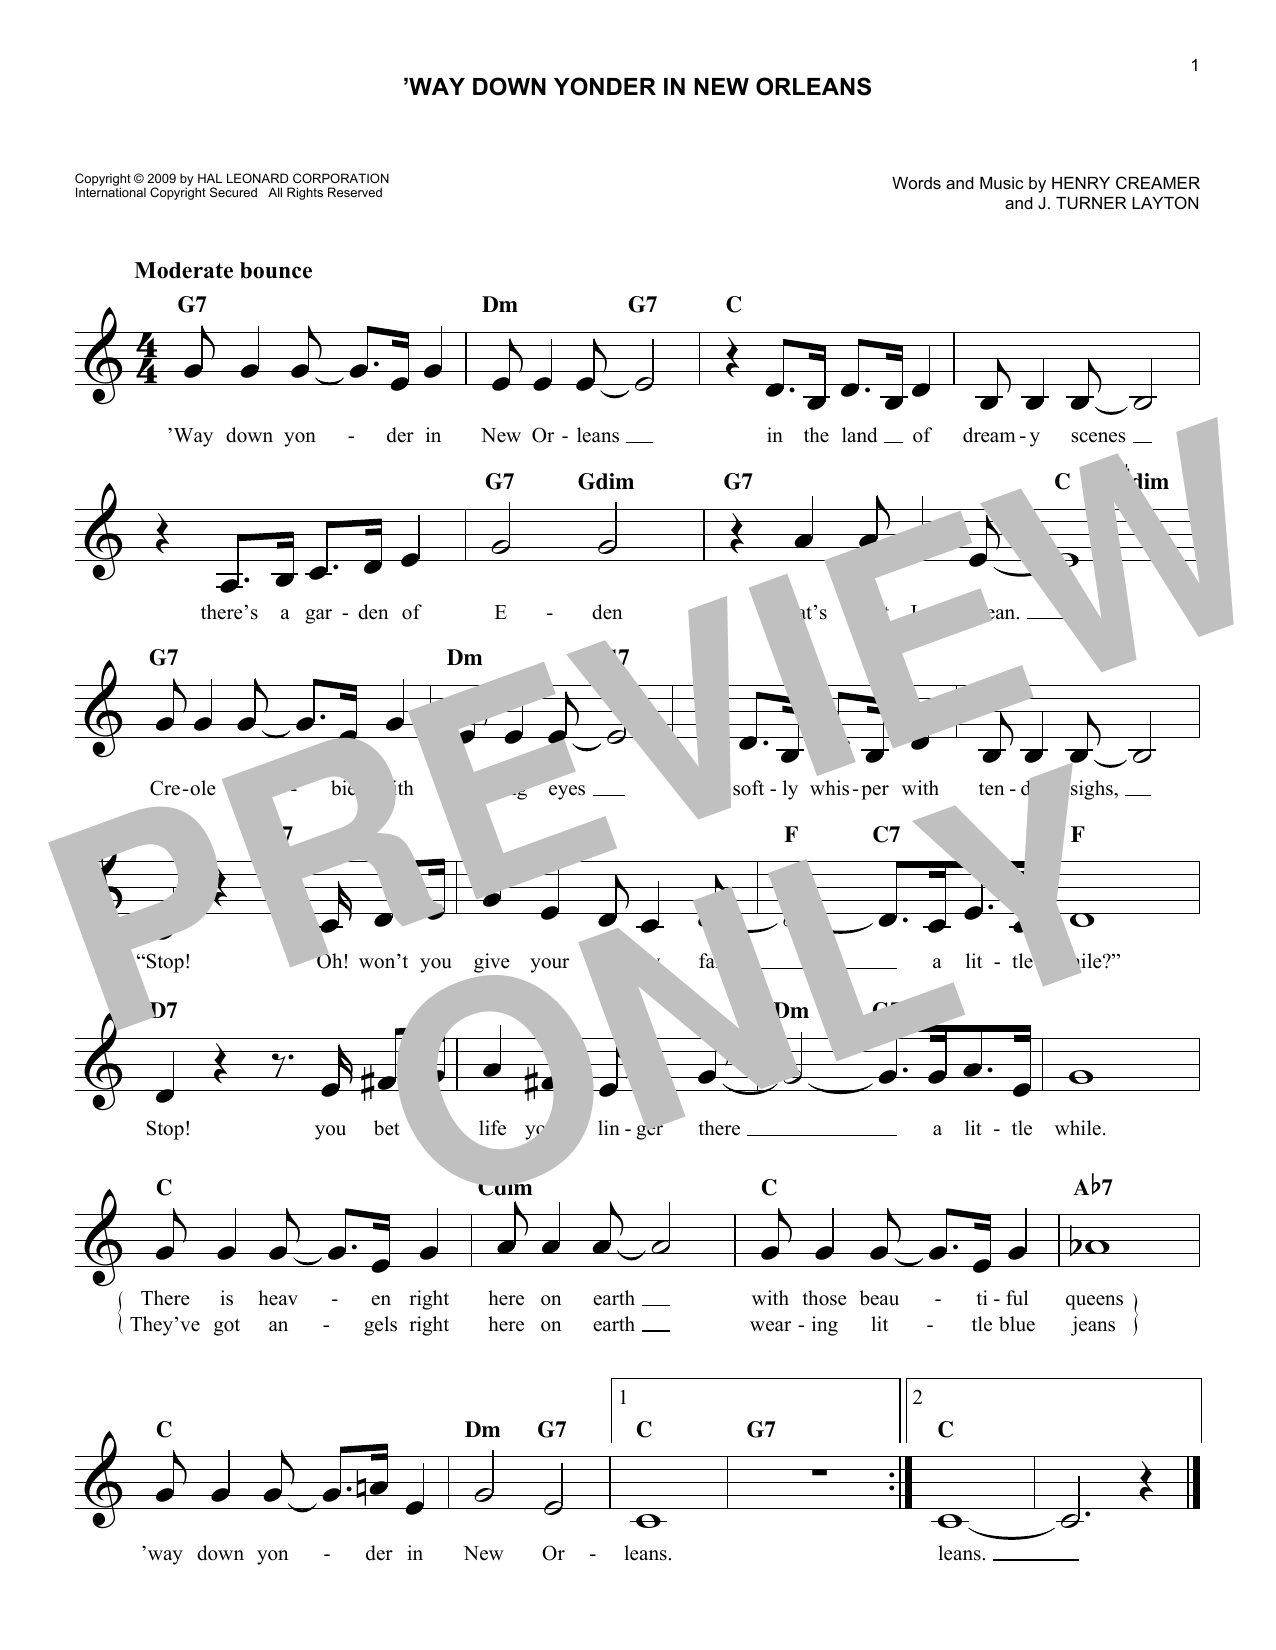 Download Freddy Cannon 'Way Down Yonder In New Orleans Sheet Music